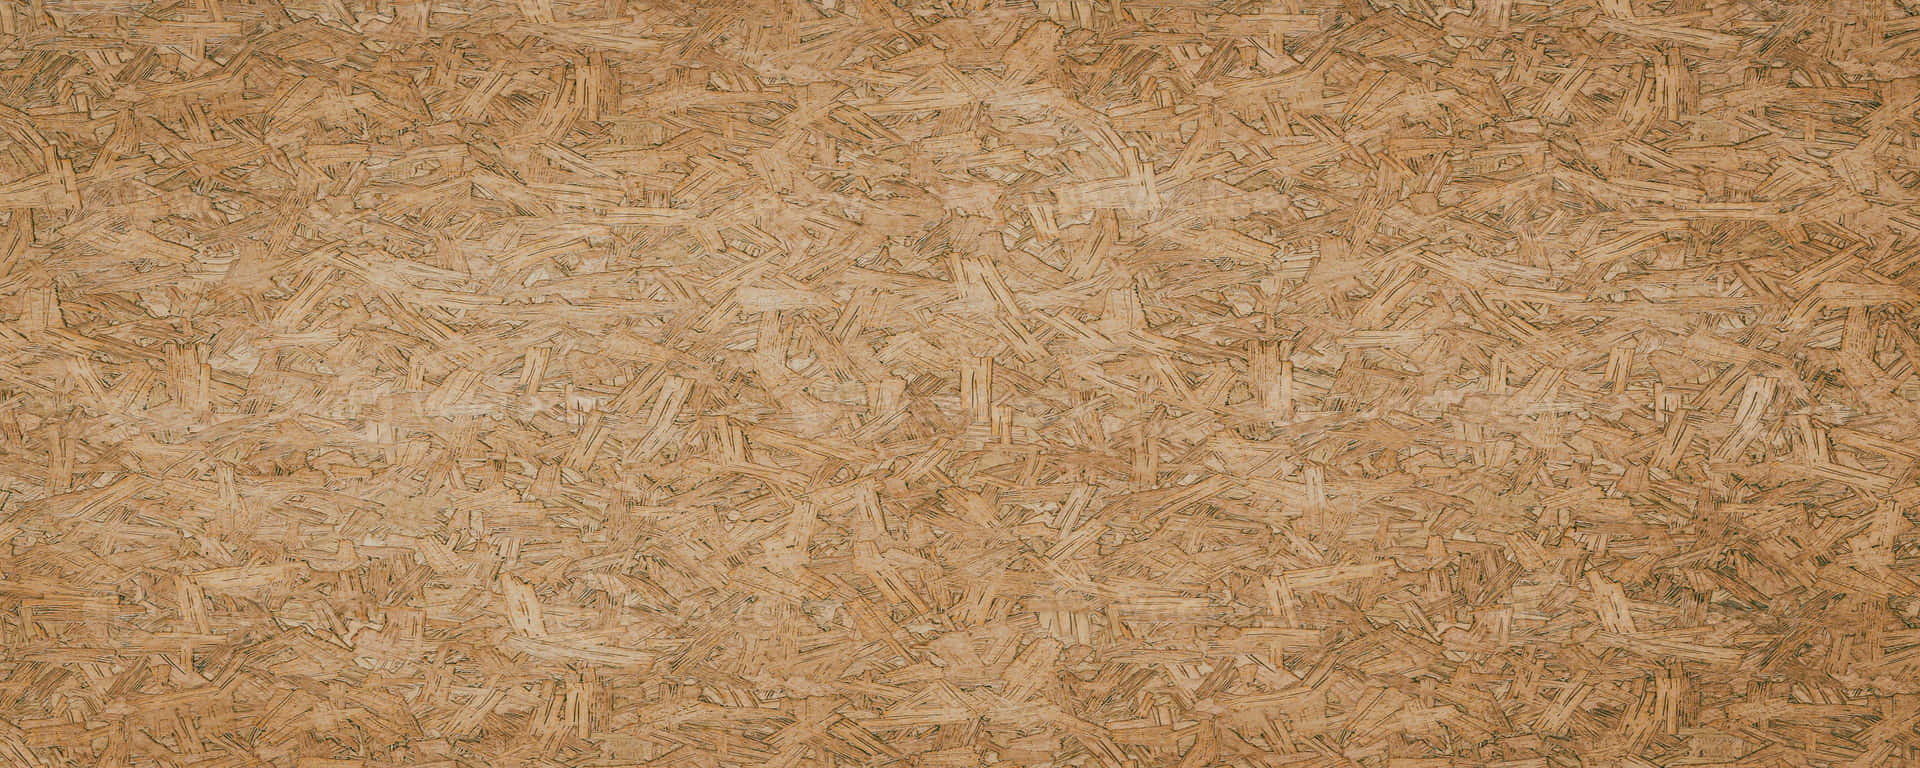 A Close Up Of A Brown Cork Background